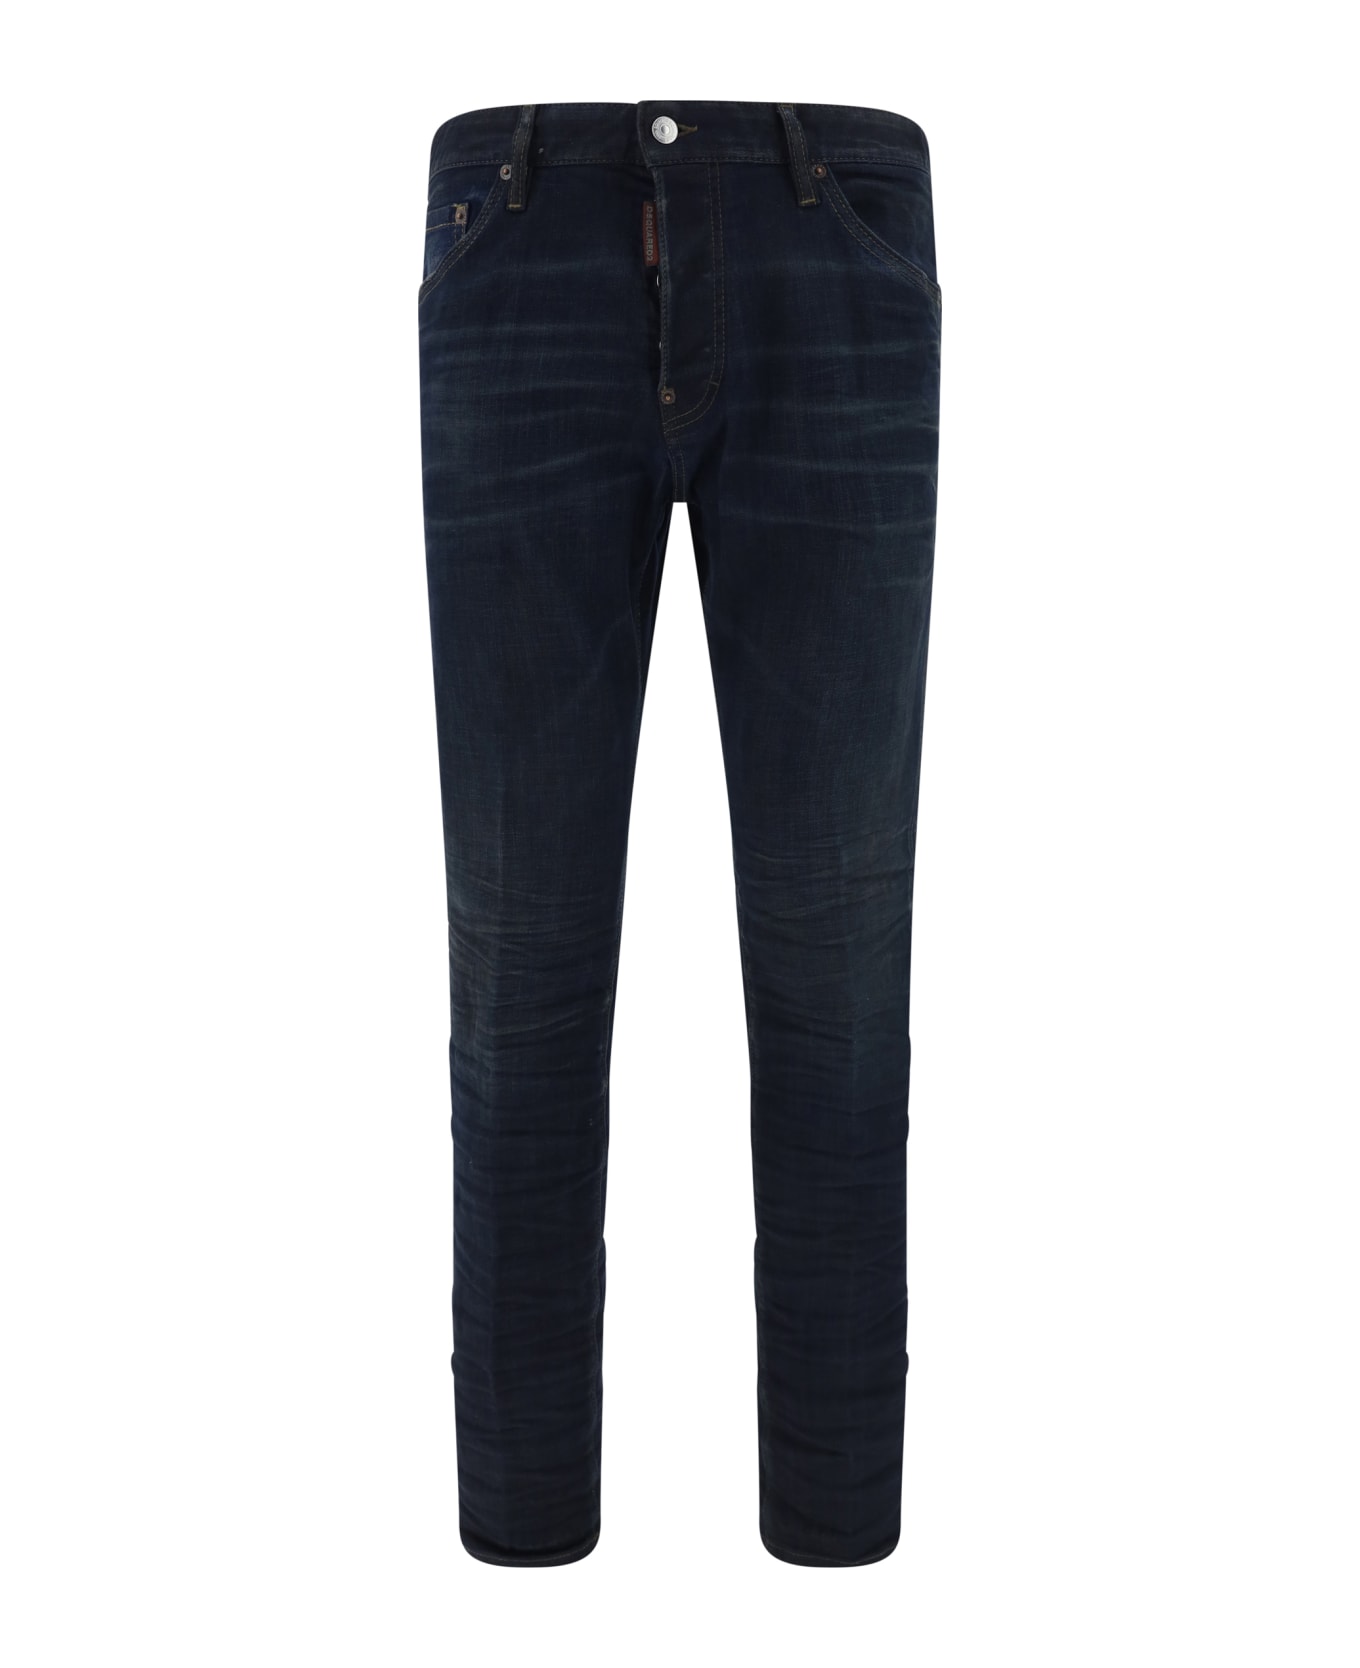 Dsquared2 Cool Guy Jeans - 470 デニム